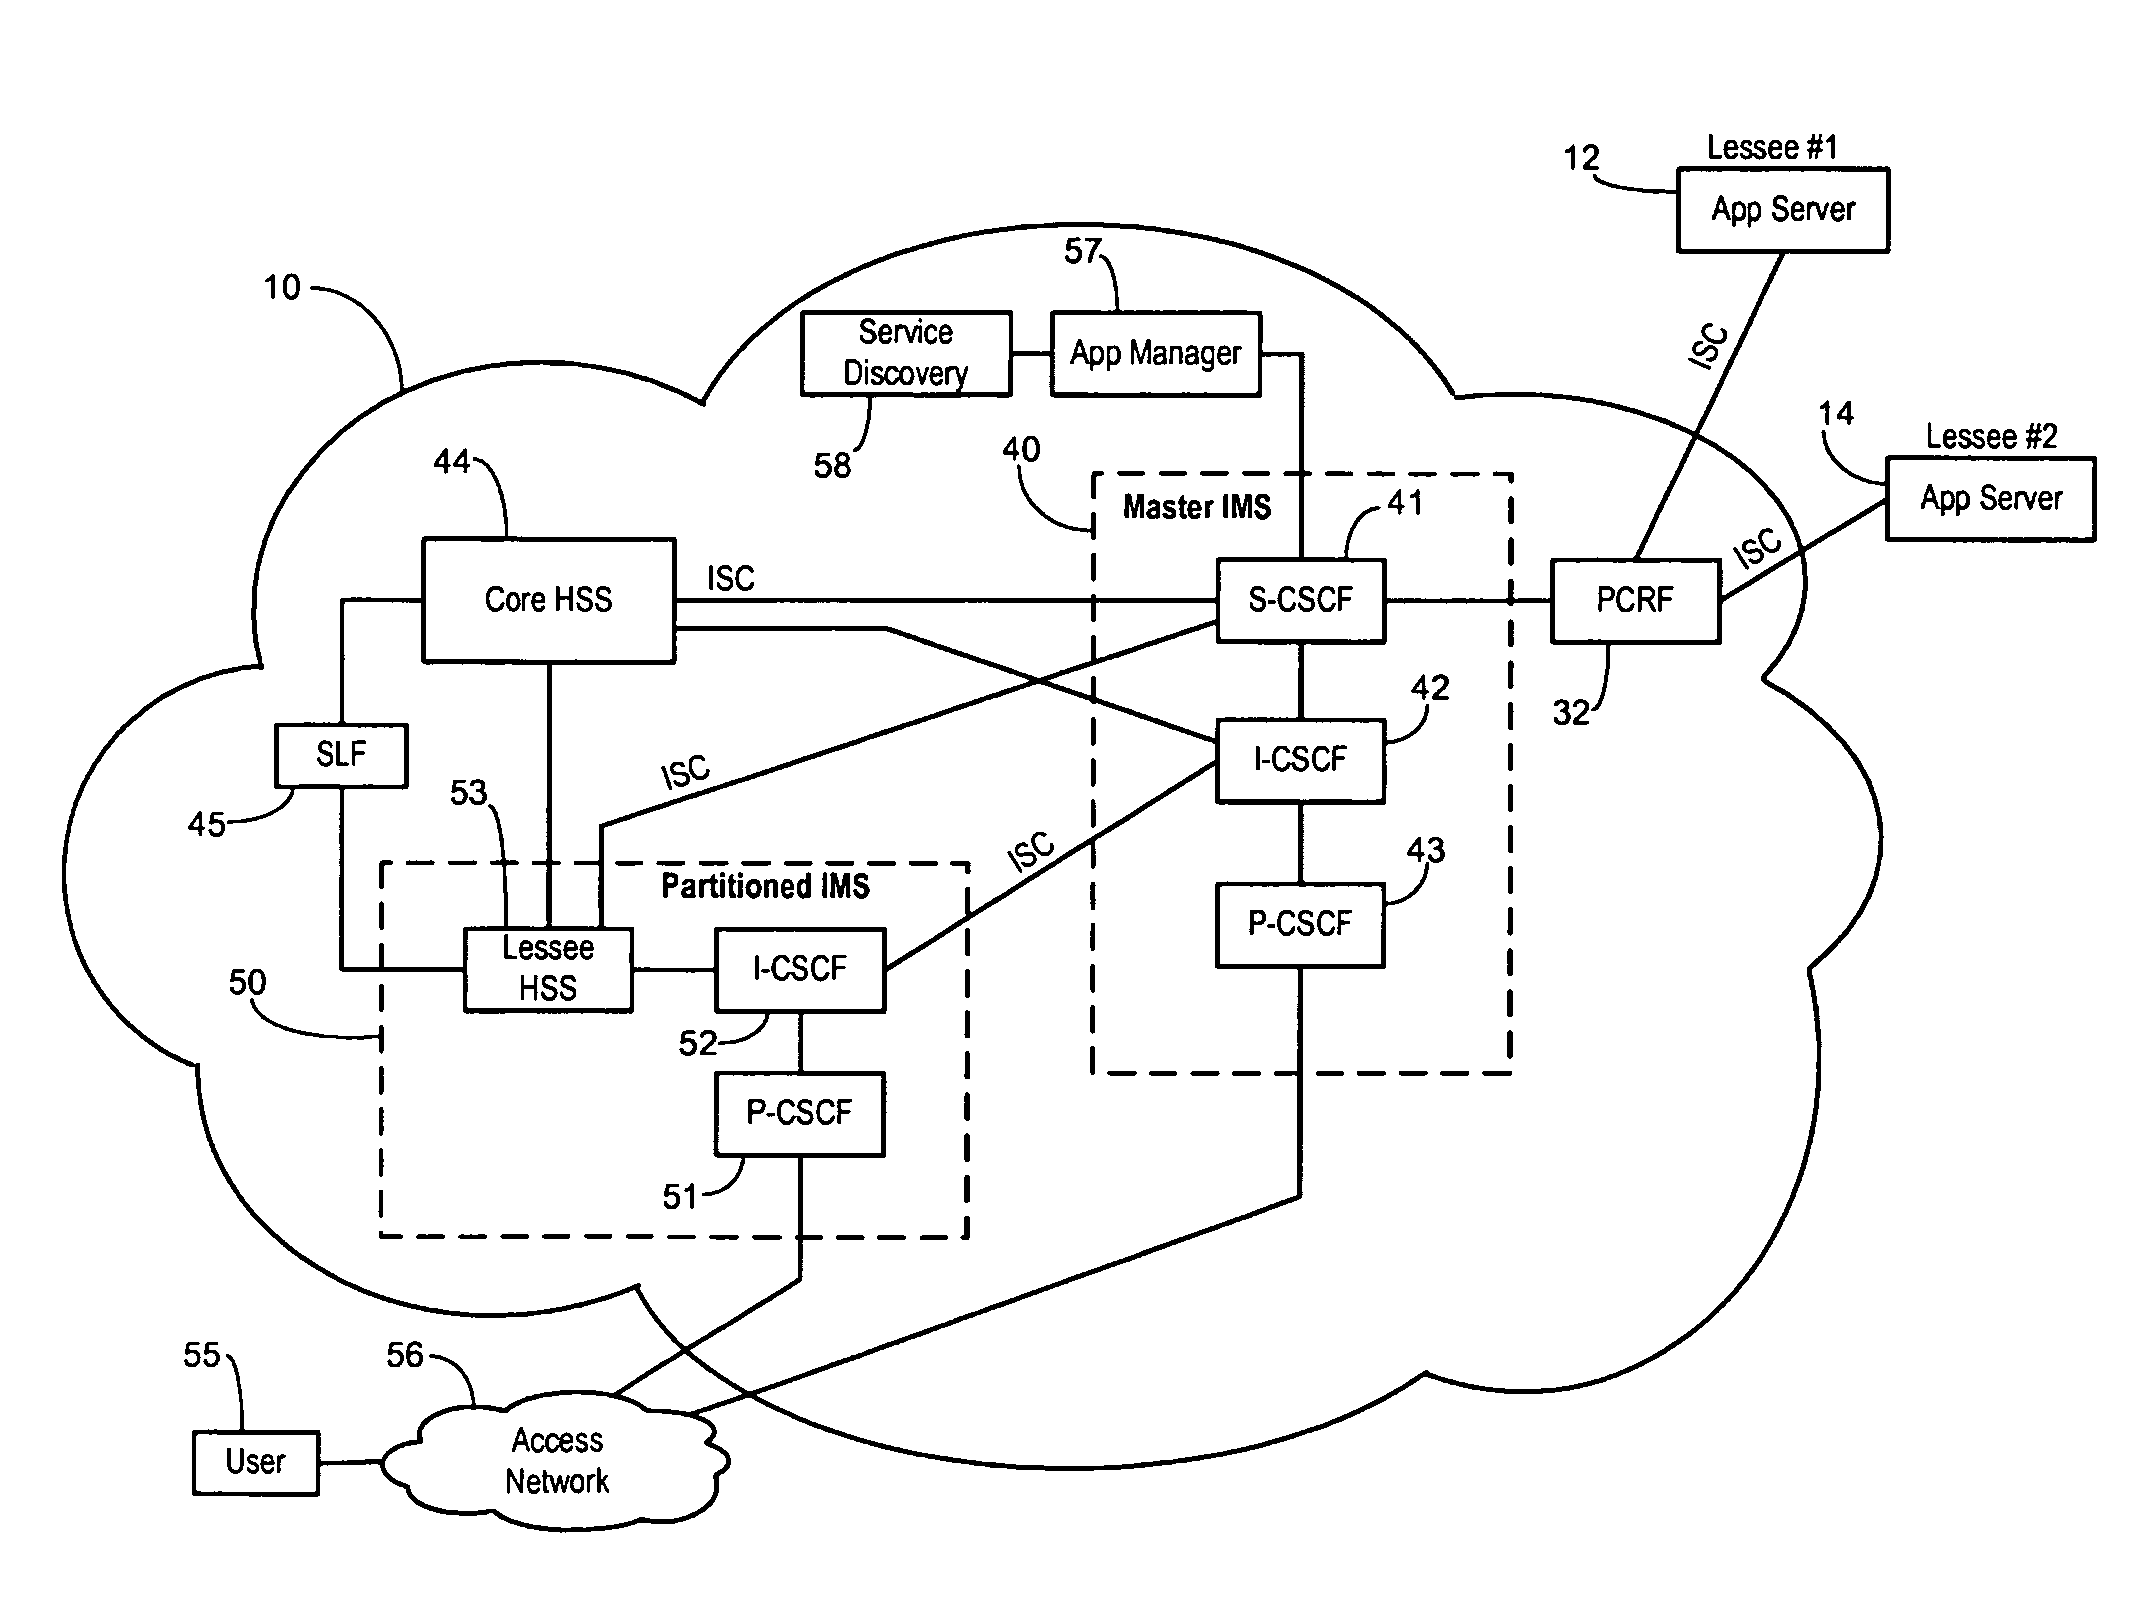 Partitioned IP multimedia subsystem call session control function